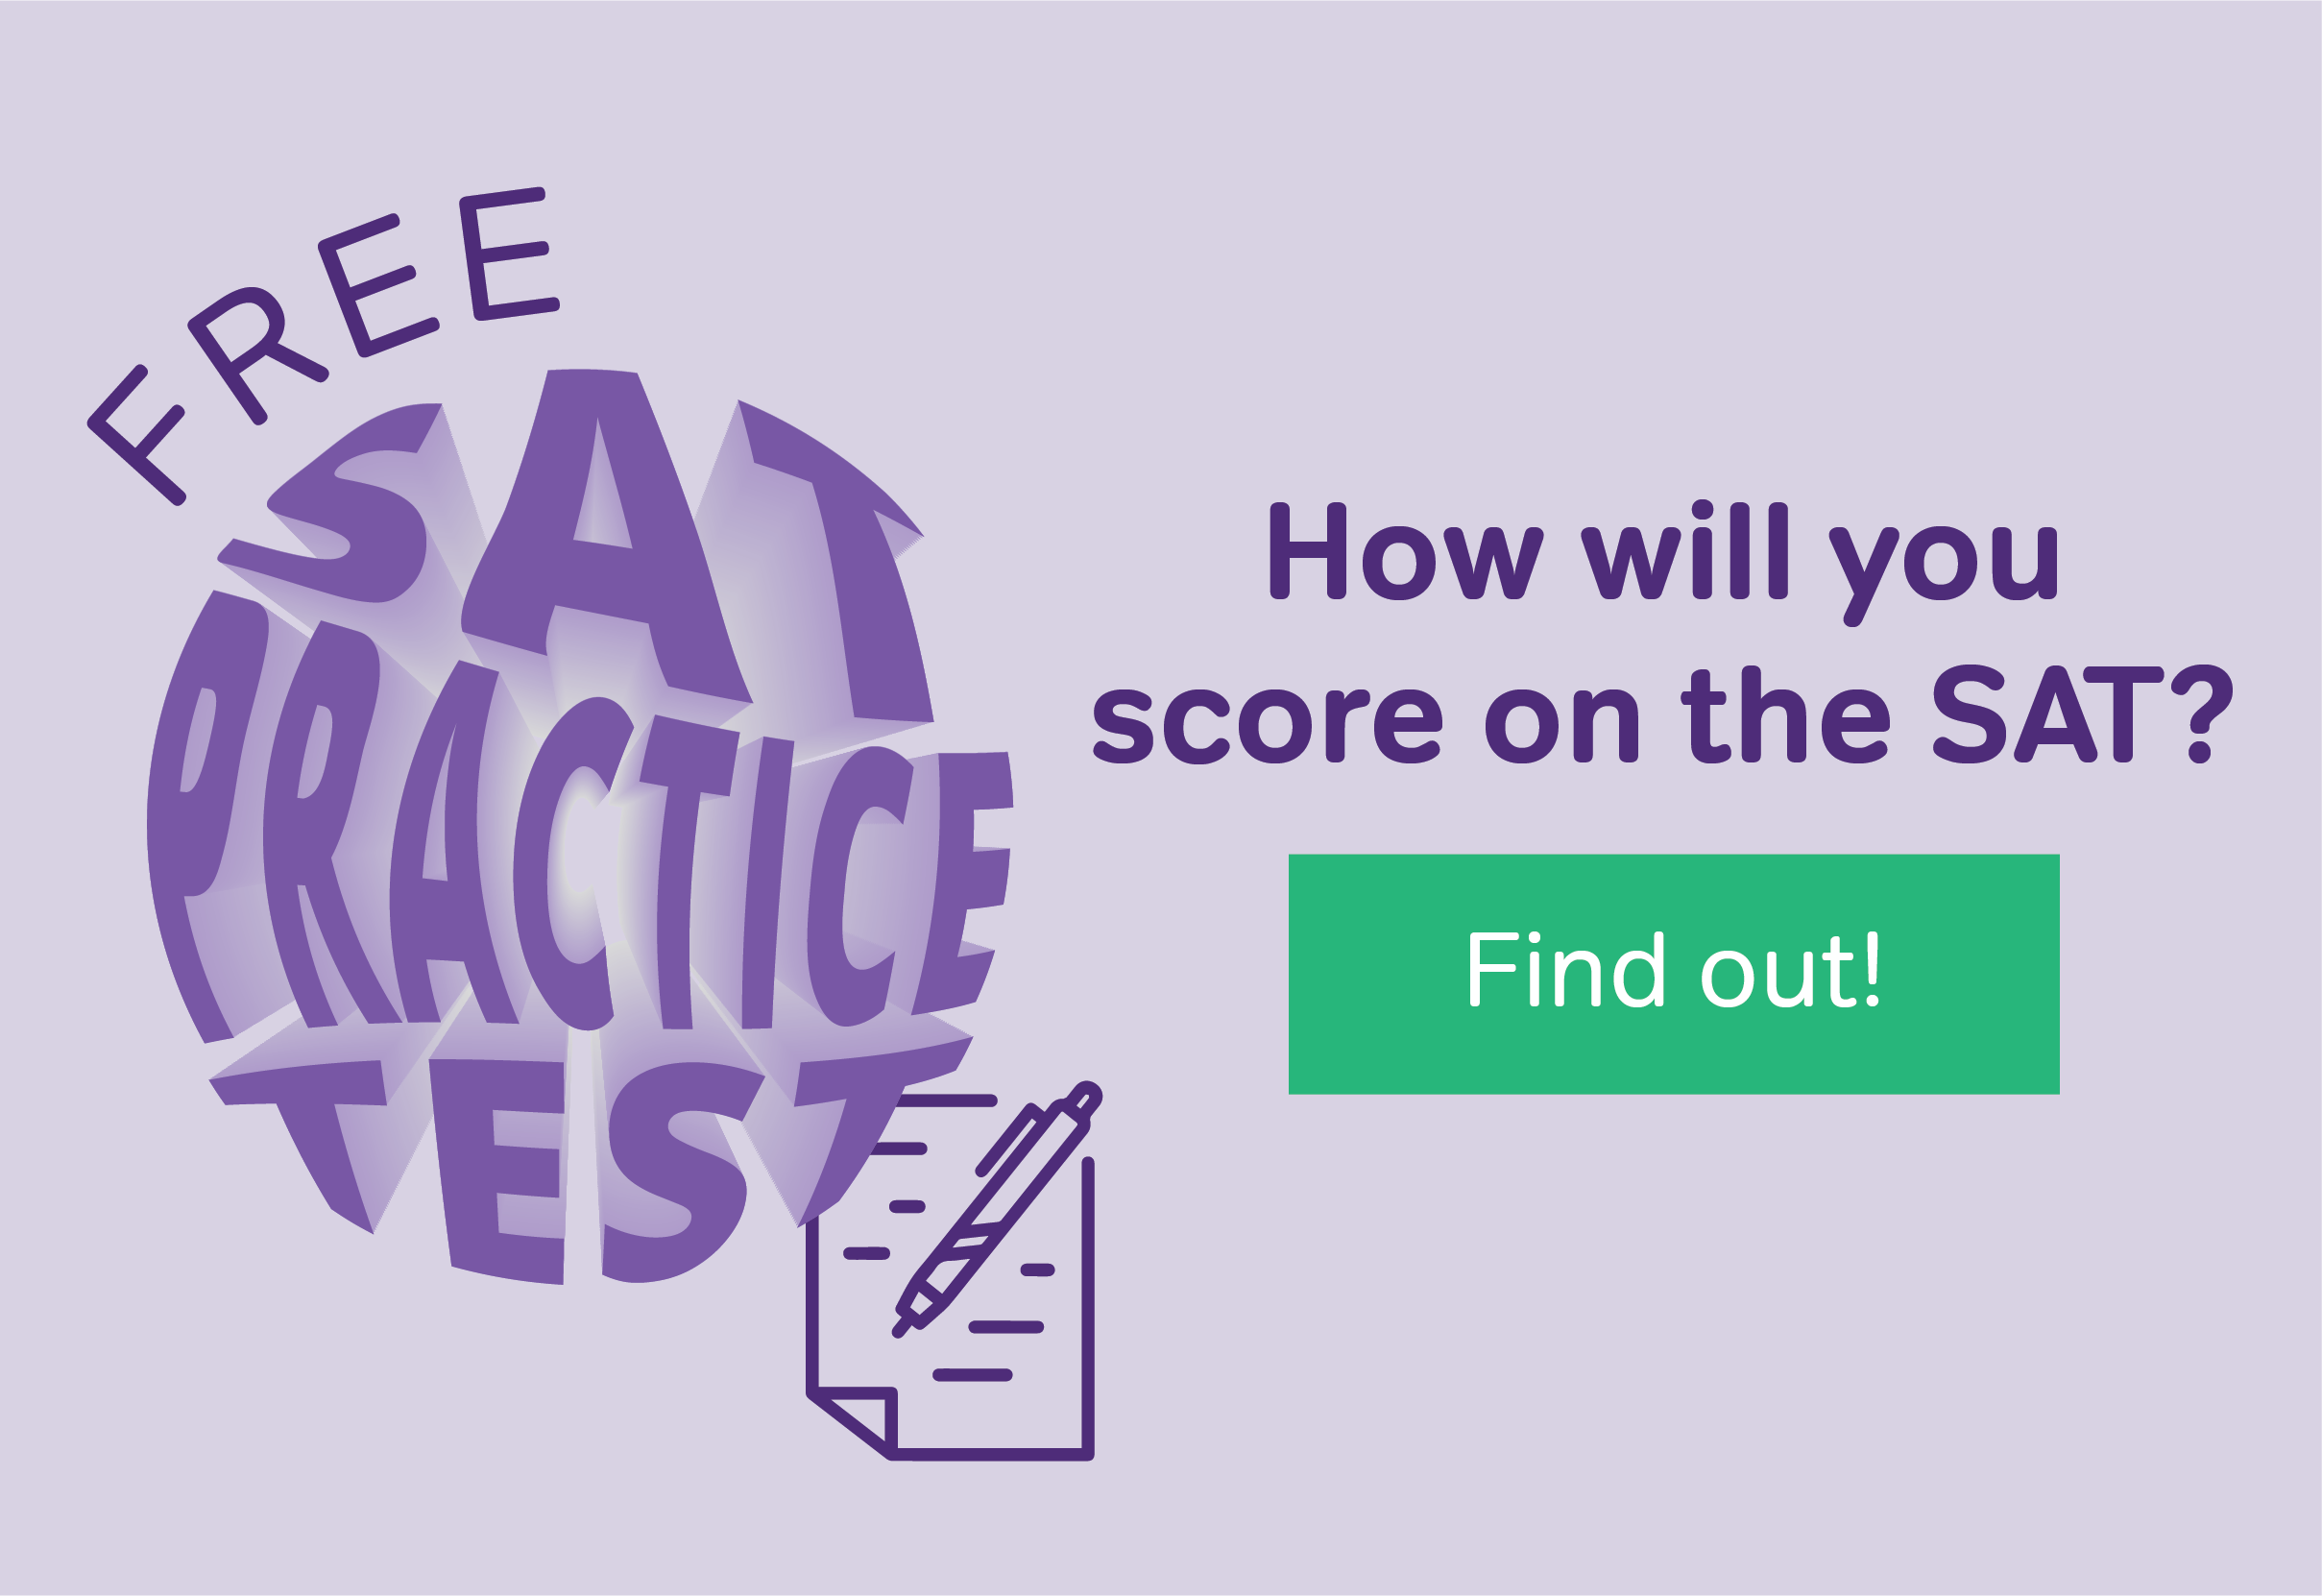 How will you score on the SAT? Find out!